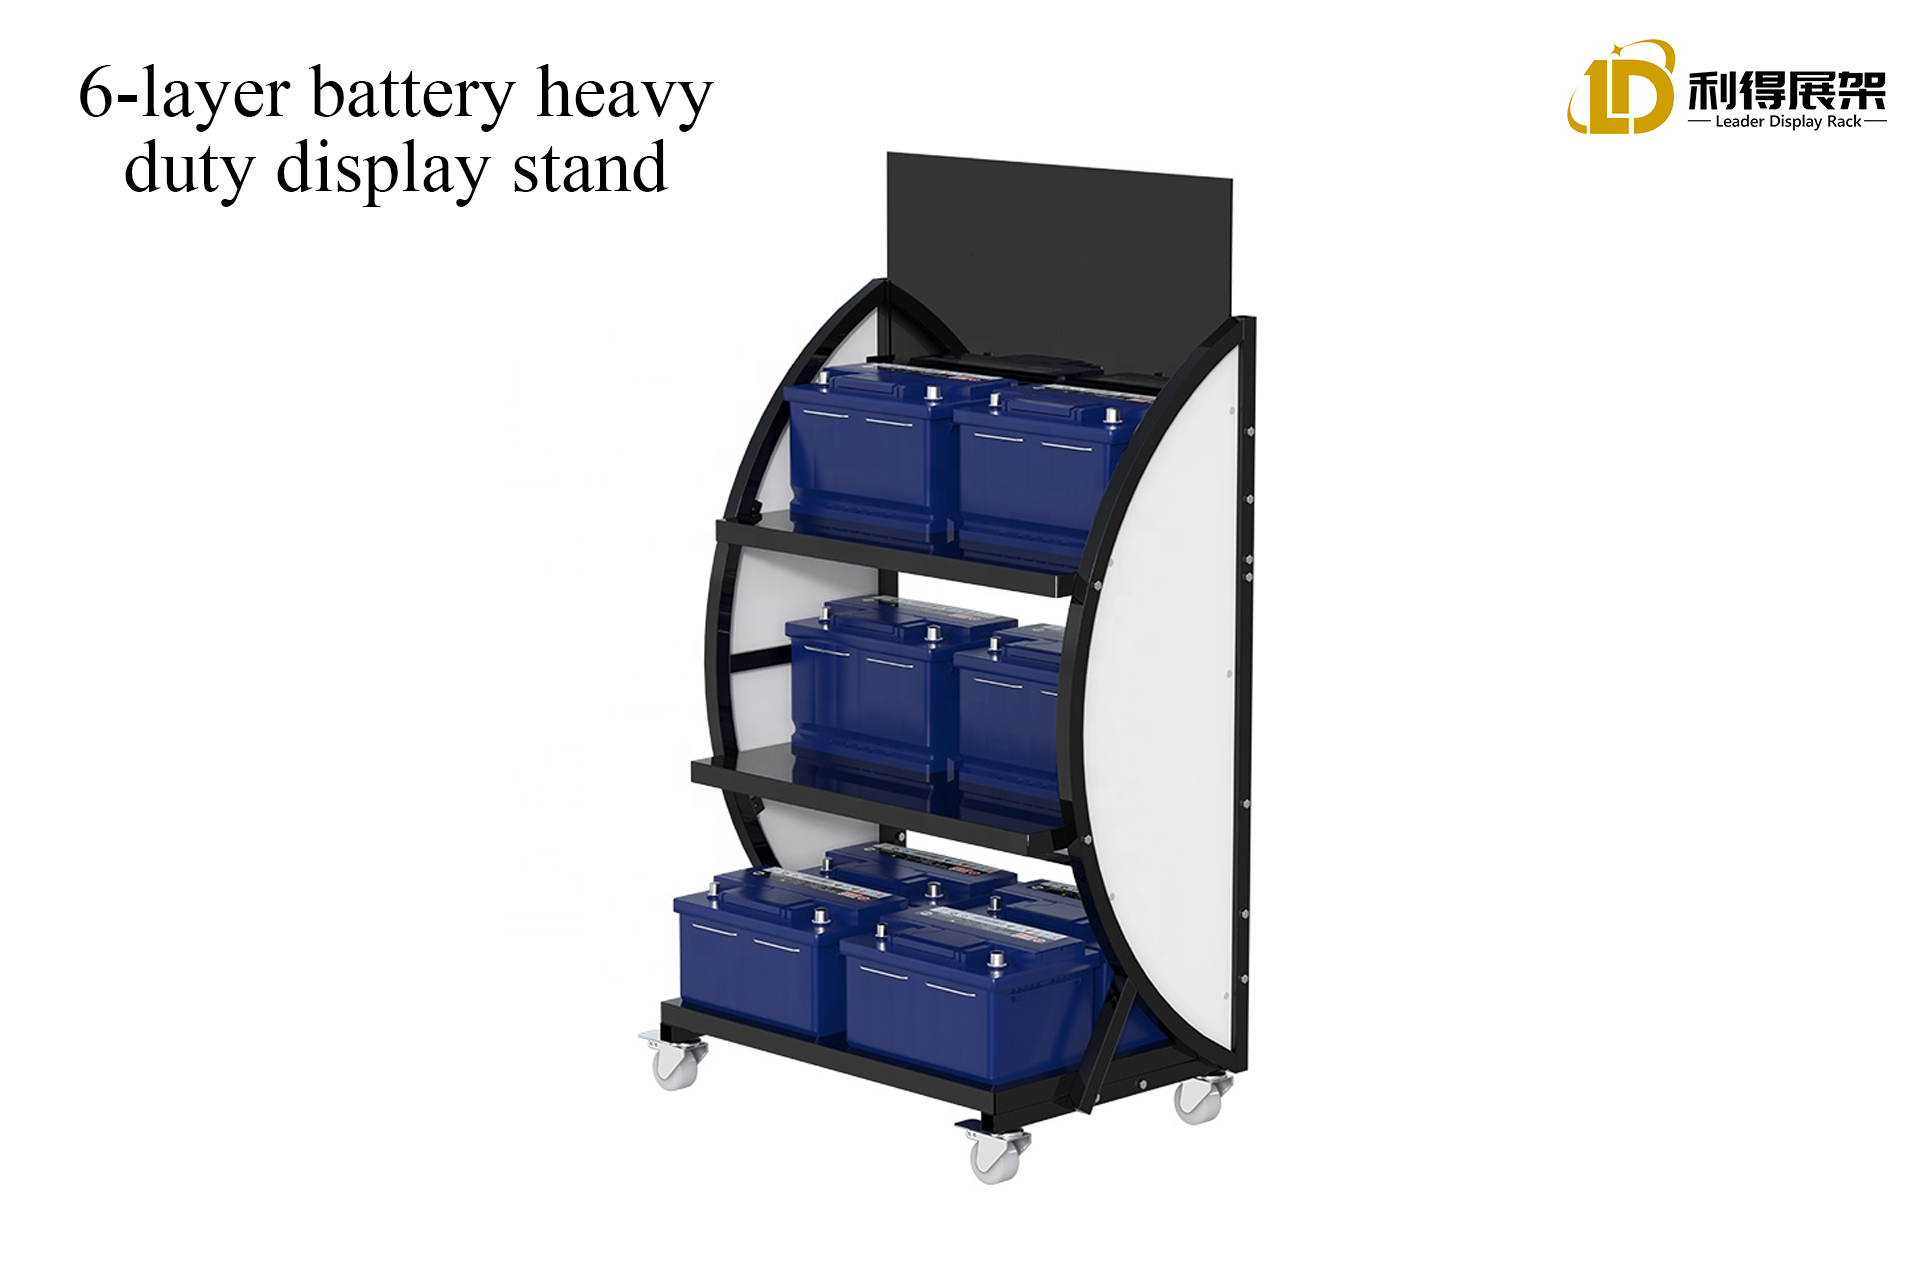 Show The Charm of Batteries, The Shock of Large Metal Display Shelves